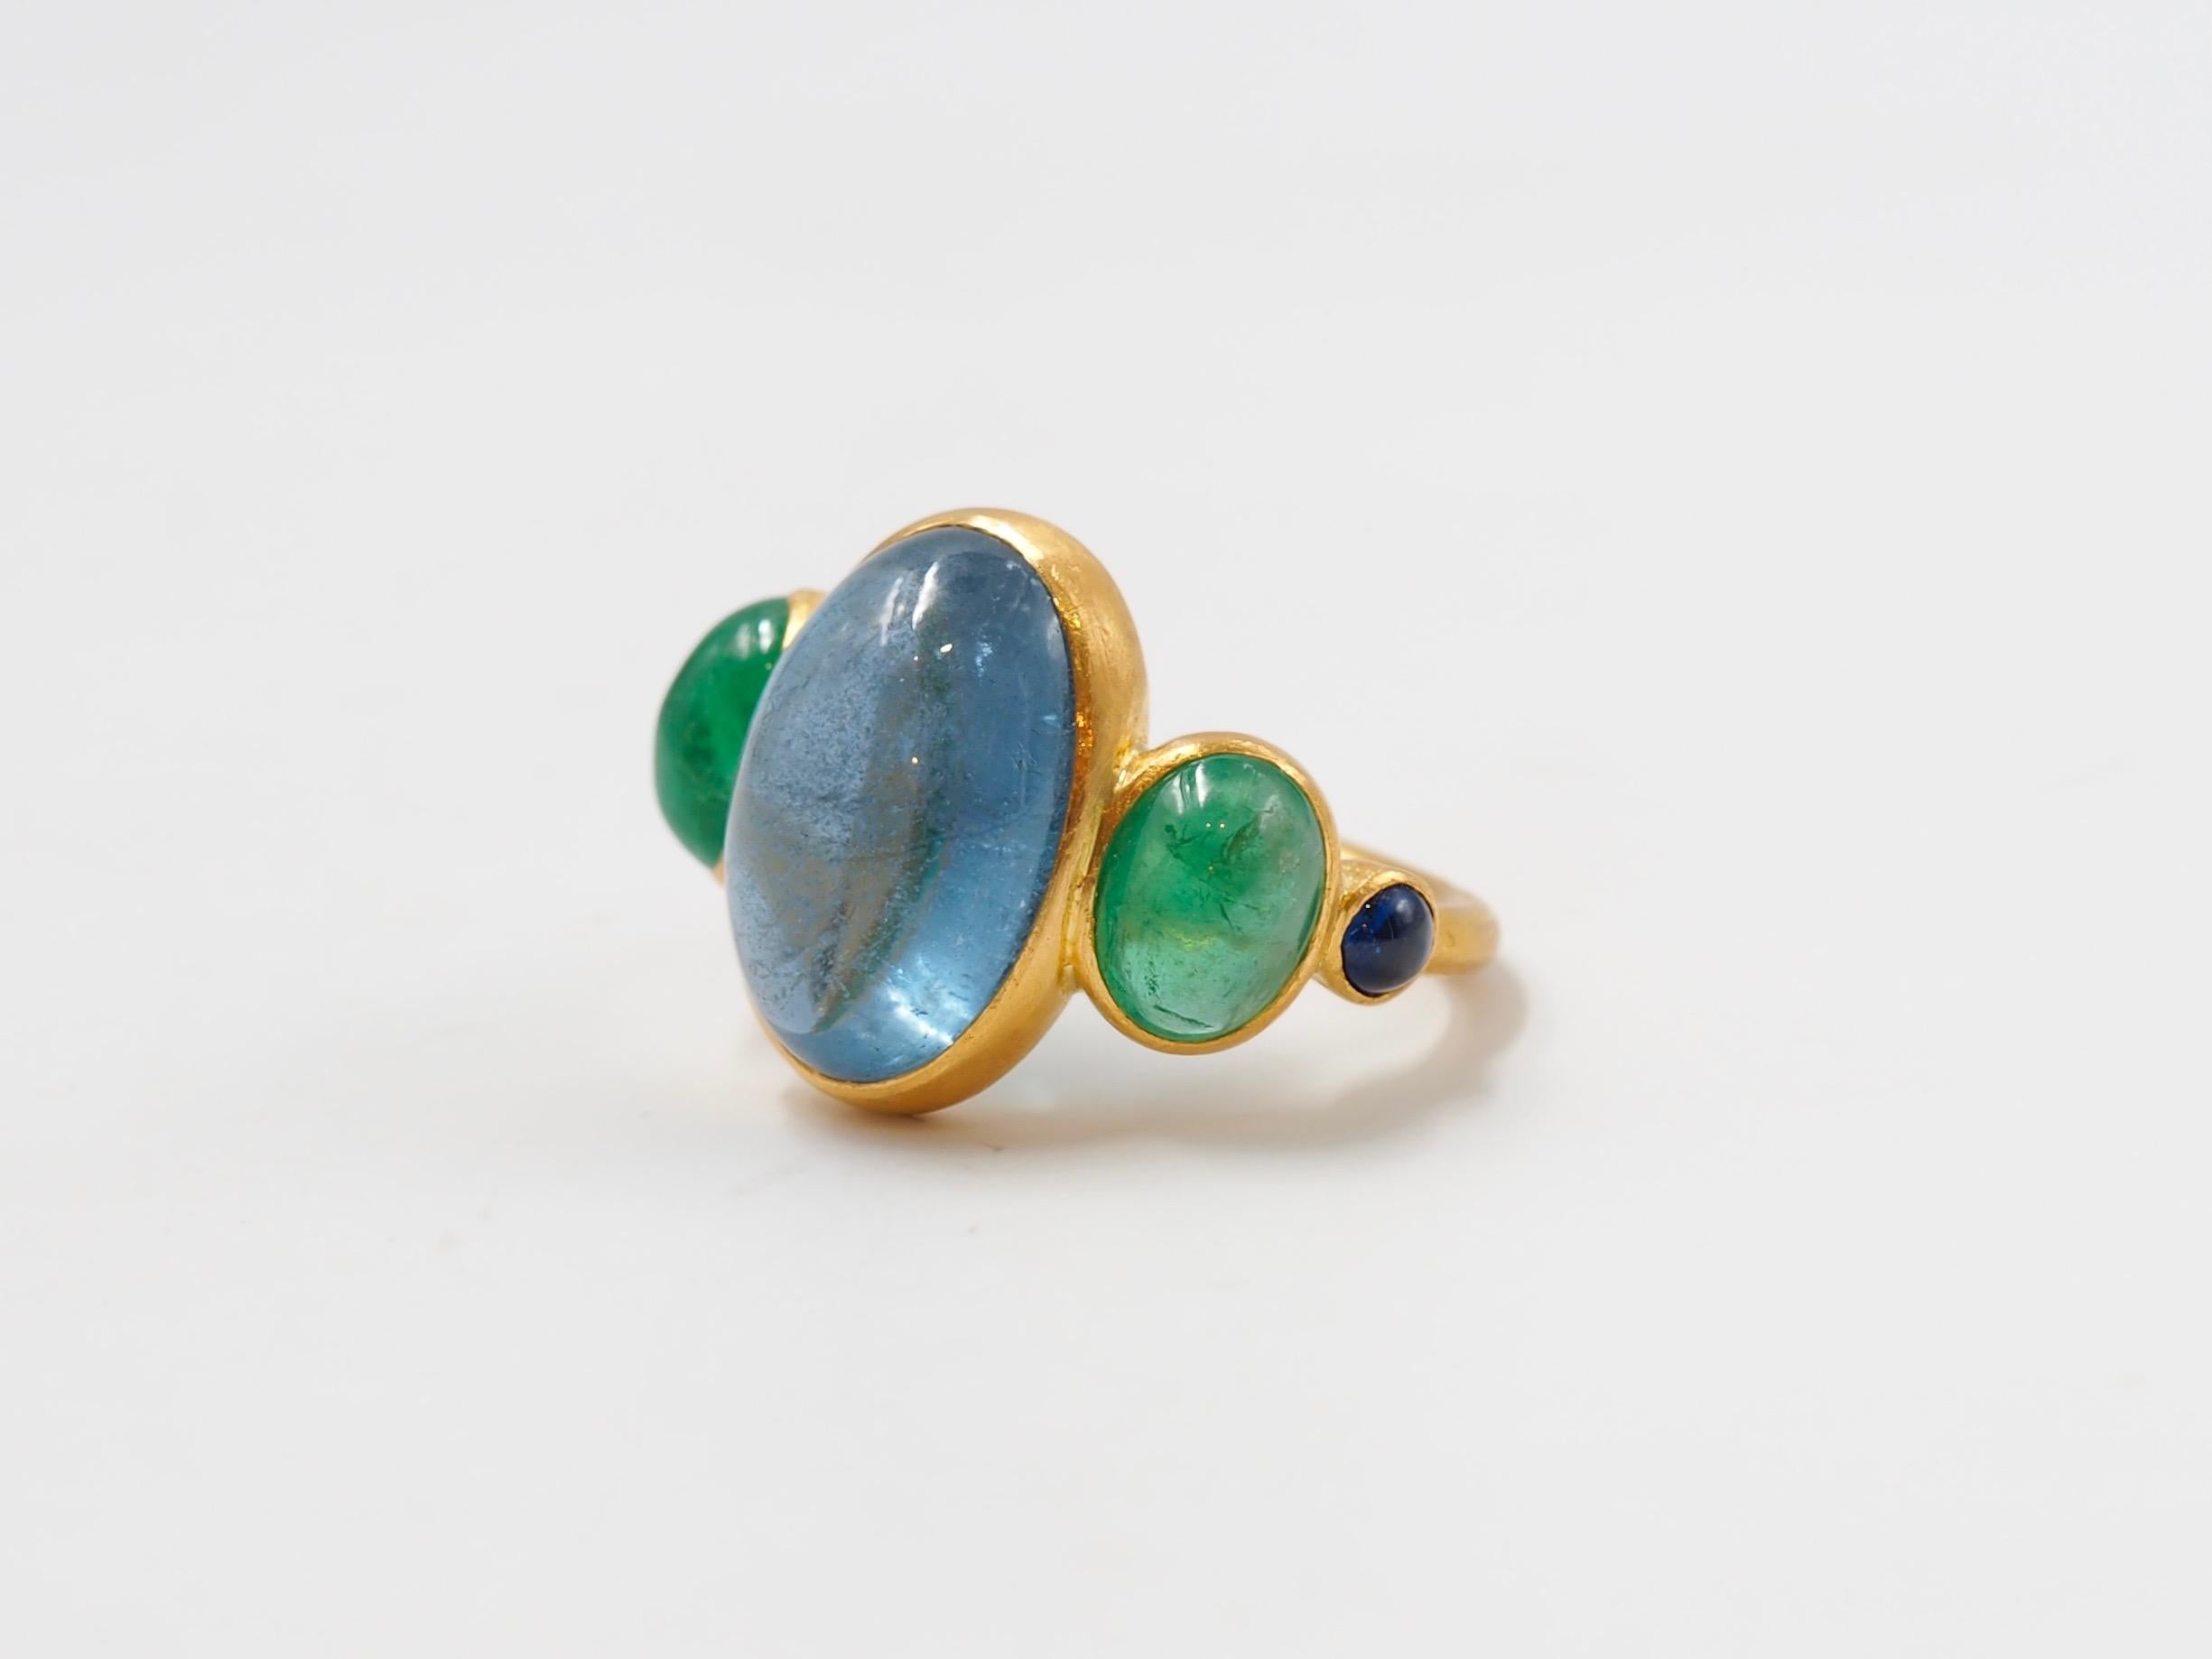 This delicate ring is composed of 5 stones in line: 1 deep blue natural aquamarine cabochon, 2 natural emerald cabochons and 2 blue sapphire cabochons. The center stone is an aquamarine of 7.88 cts and the 2 emeralds have a total weight of 2.66 cts.